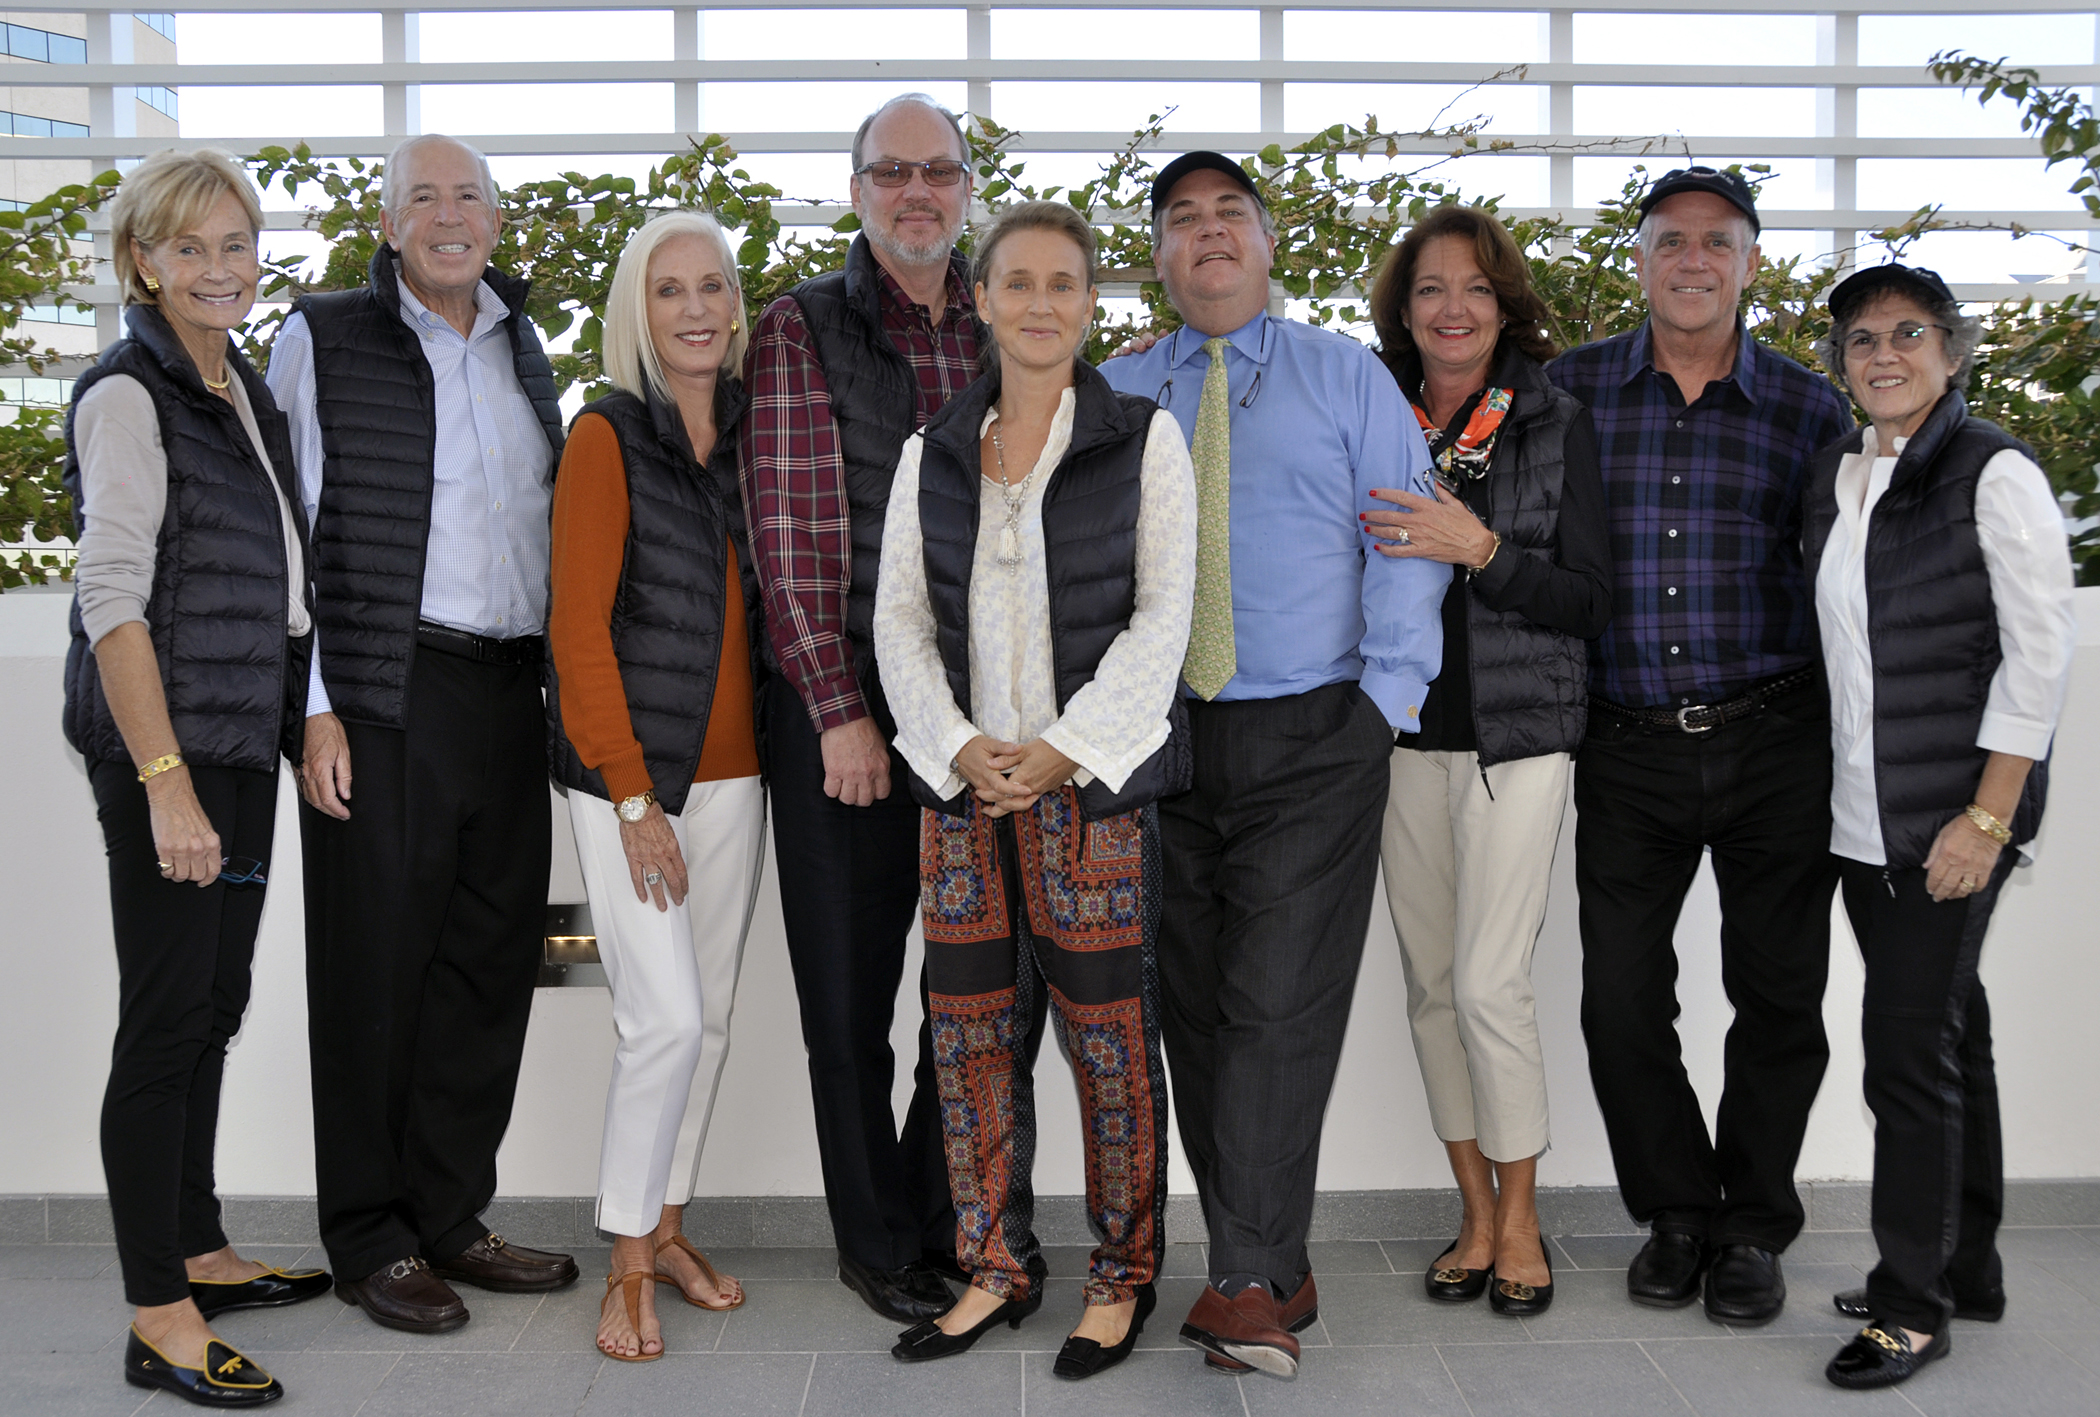 ‘THE BASH!’ event committee leaders are Brad and Mary Beth Goddard;  Jean Martin and Doc Werlin; Mary Ann and John Meyer; Sherry and Tom Koski; Kat and Florian Schuetz; and Wendy Surkis and Peppi Elon